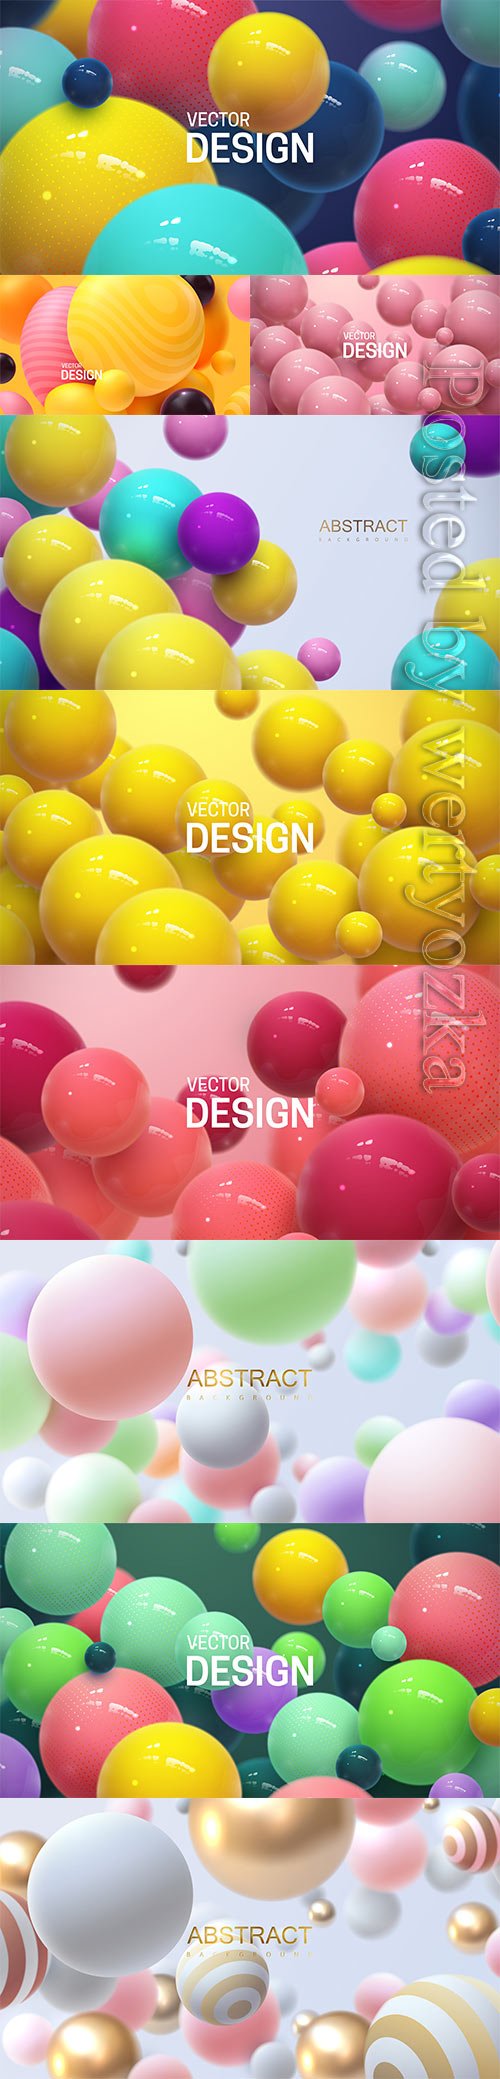 Abstract vector background with 3d spheres